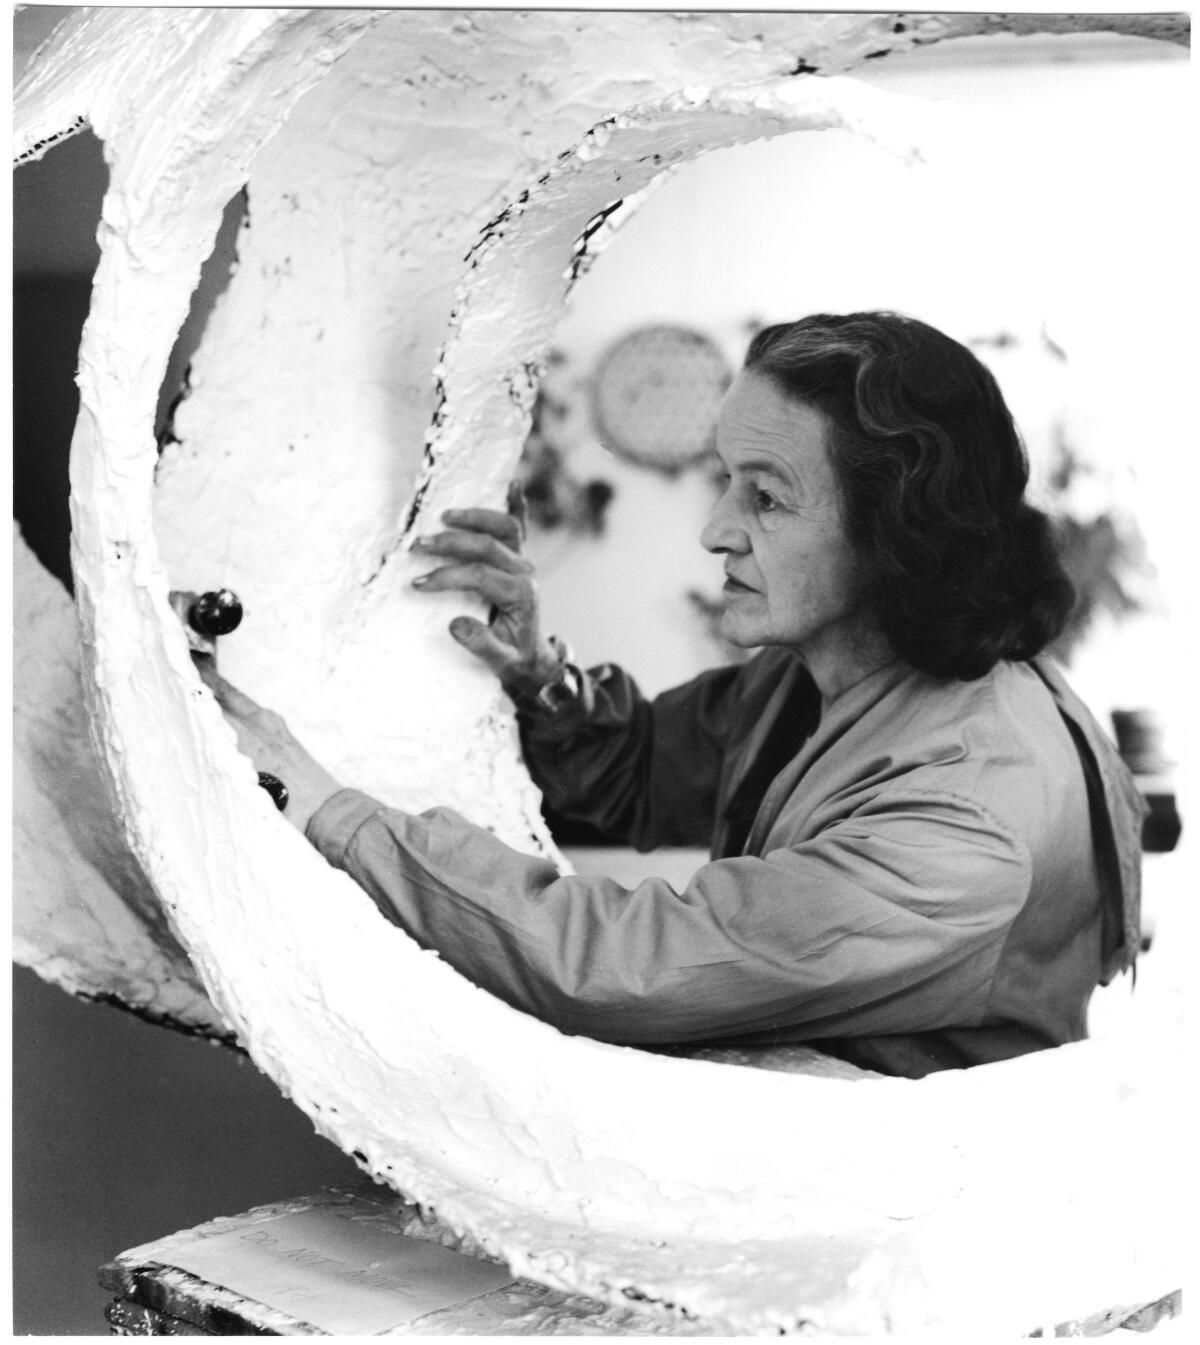 Barbara Hepworth at work on the plaster for Oval Form (Trezion), 1963.